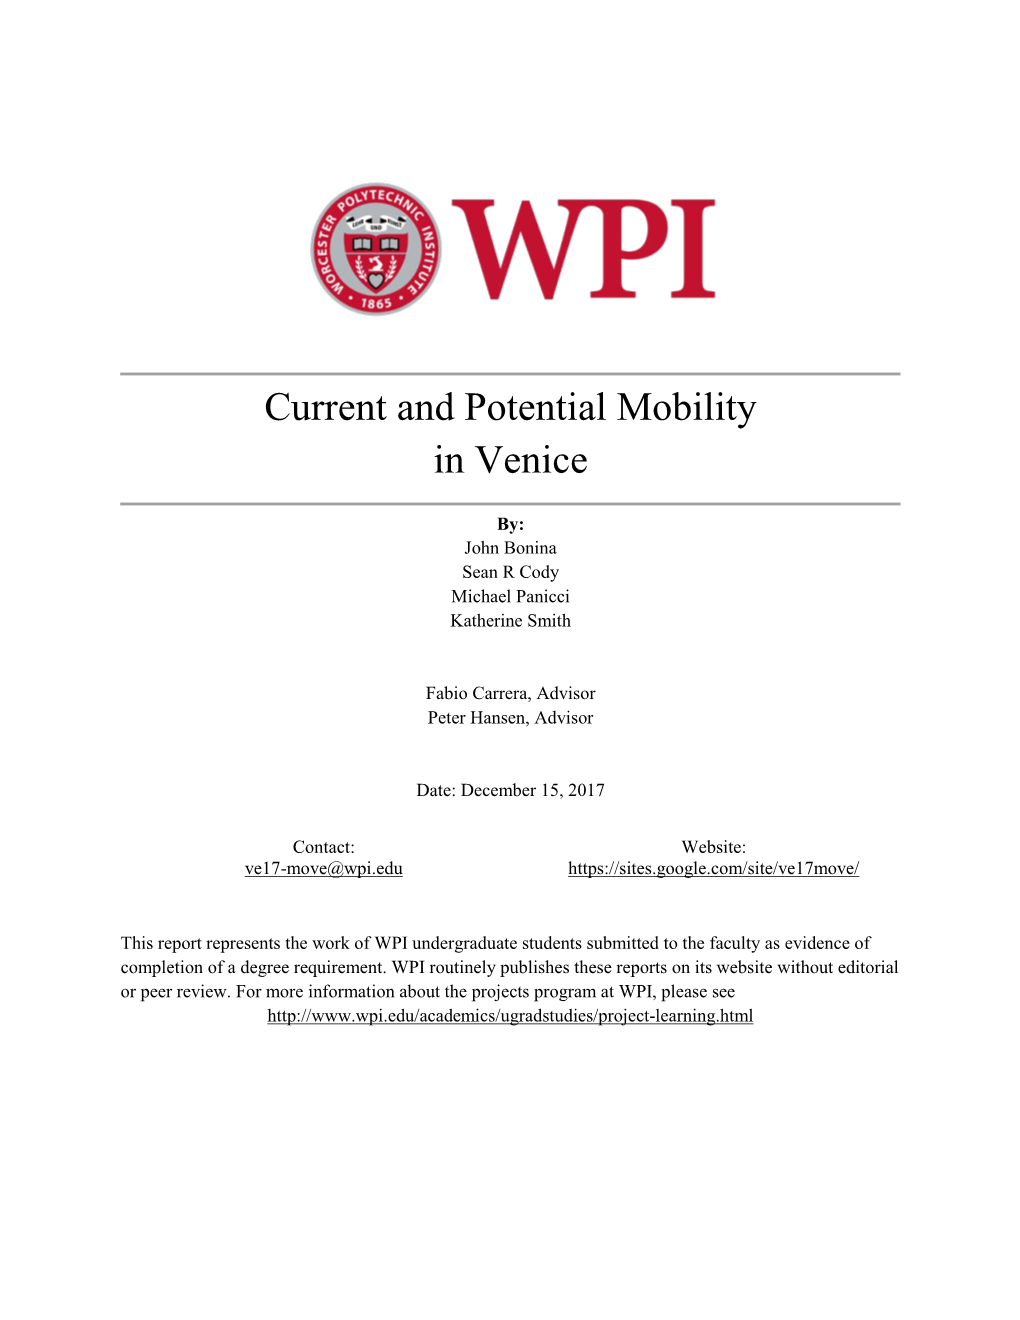 Current and Potential Mobility in Venice